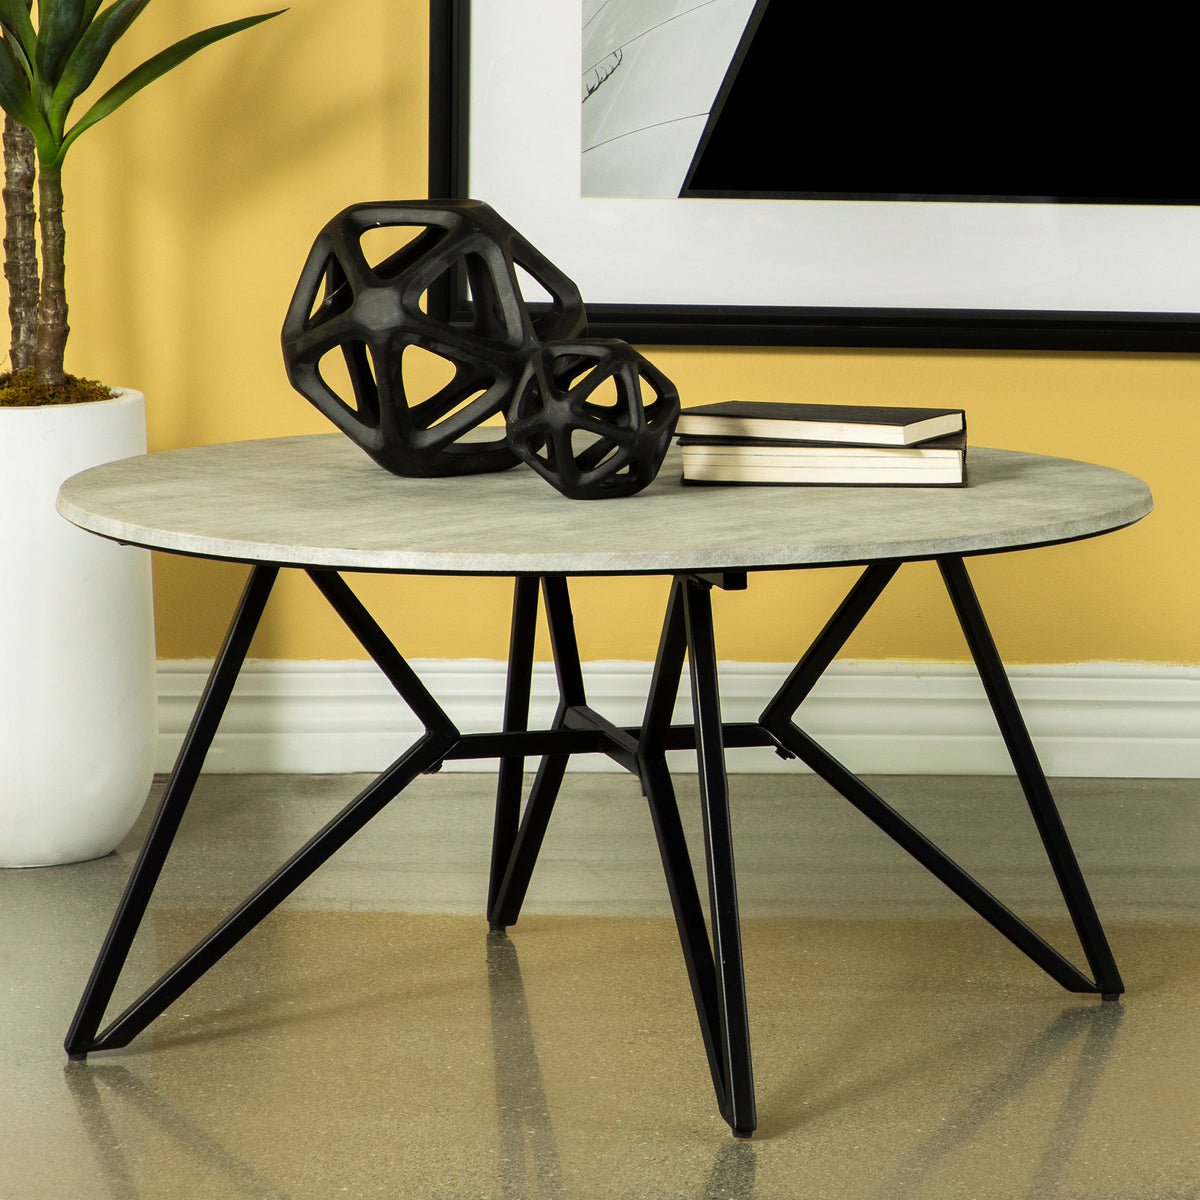 Hadi Round Coffee Table with Hairpin Legs Cement and Gunmetal Hadi Round Coffee Table with Hairpin Legs Cement and Gunmetal Half Price Furniture